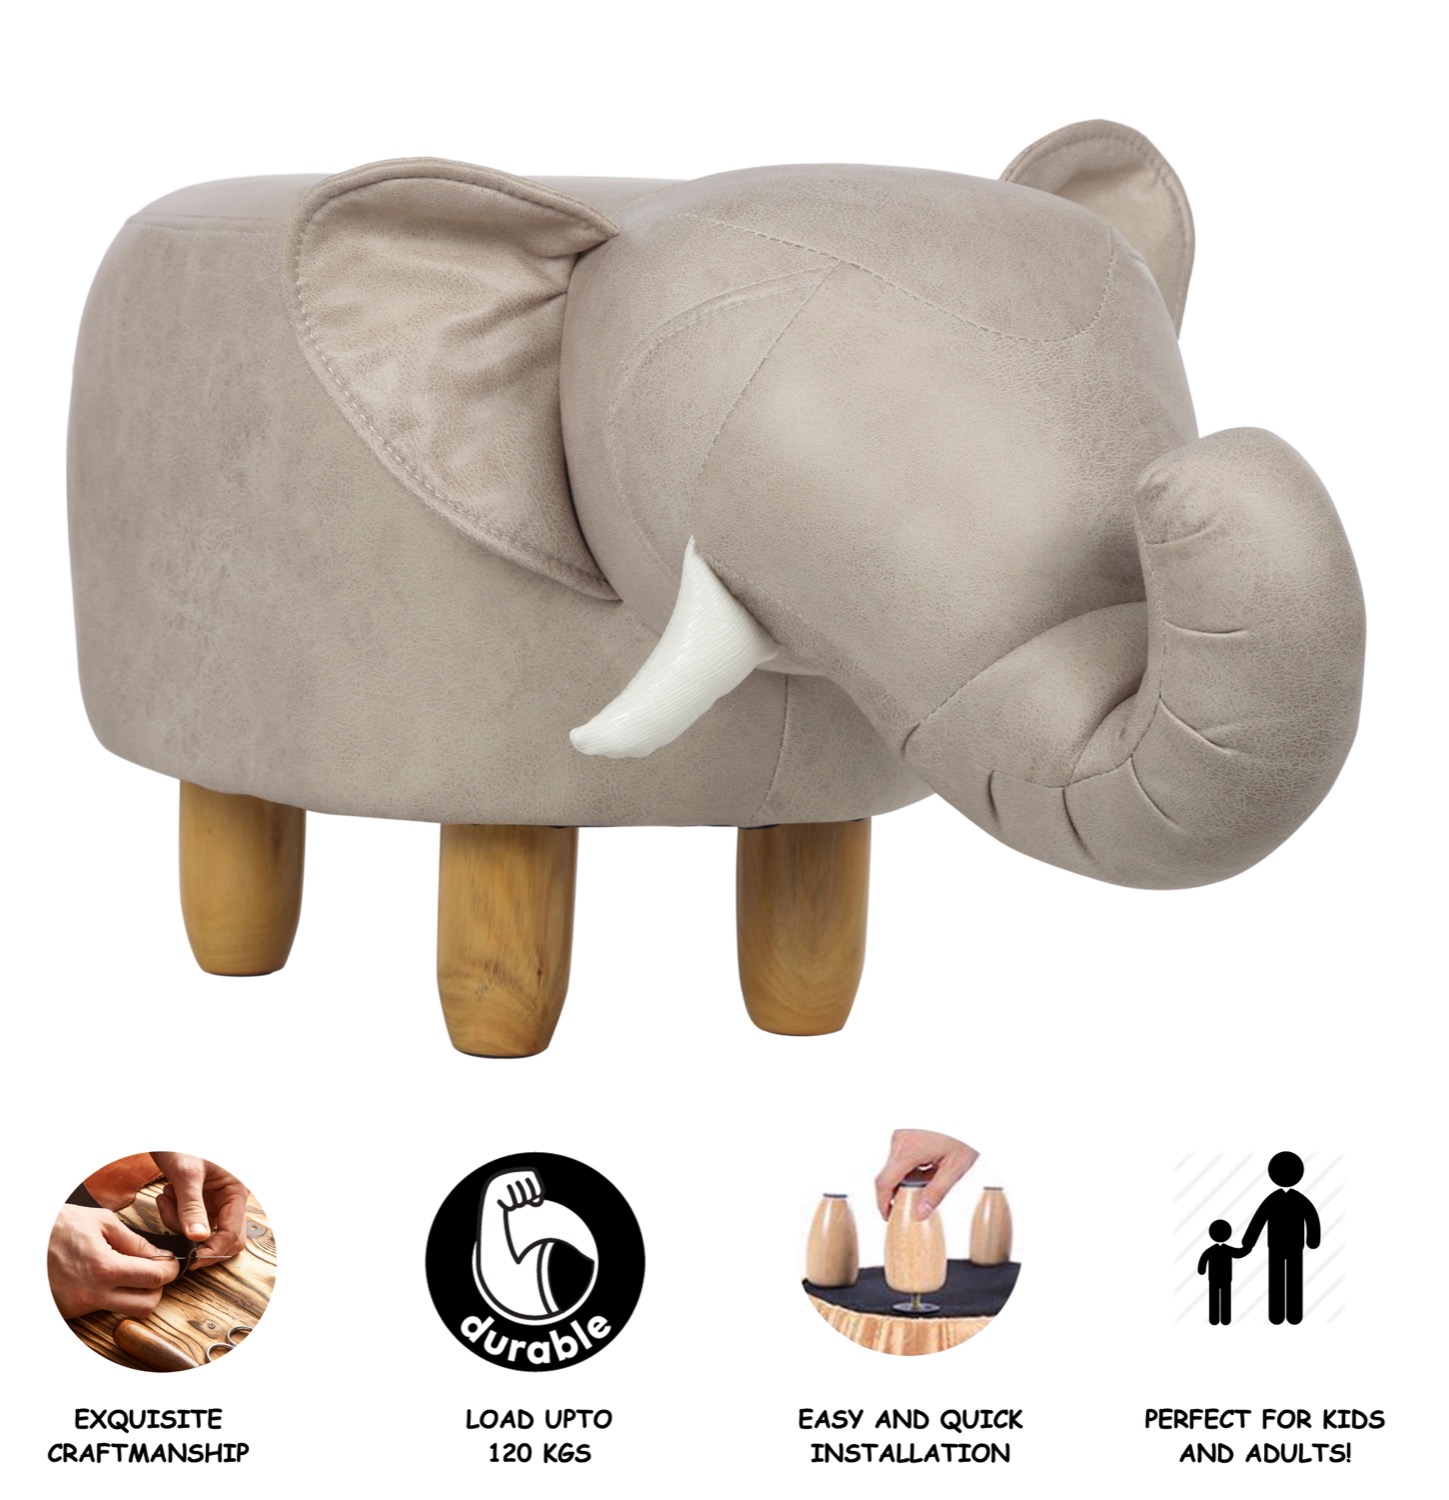 Upholstered Elephant Ride On Ottoman Footrest Stool With Vivid Adorable Animal  Shape Padded Seat. (Kids And Adults, Beige Elephant) - 24x7 eMall